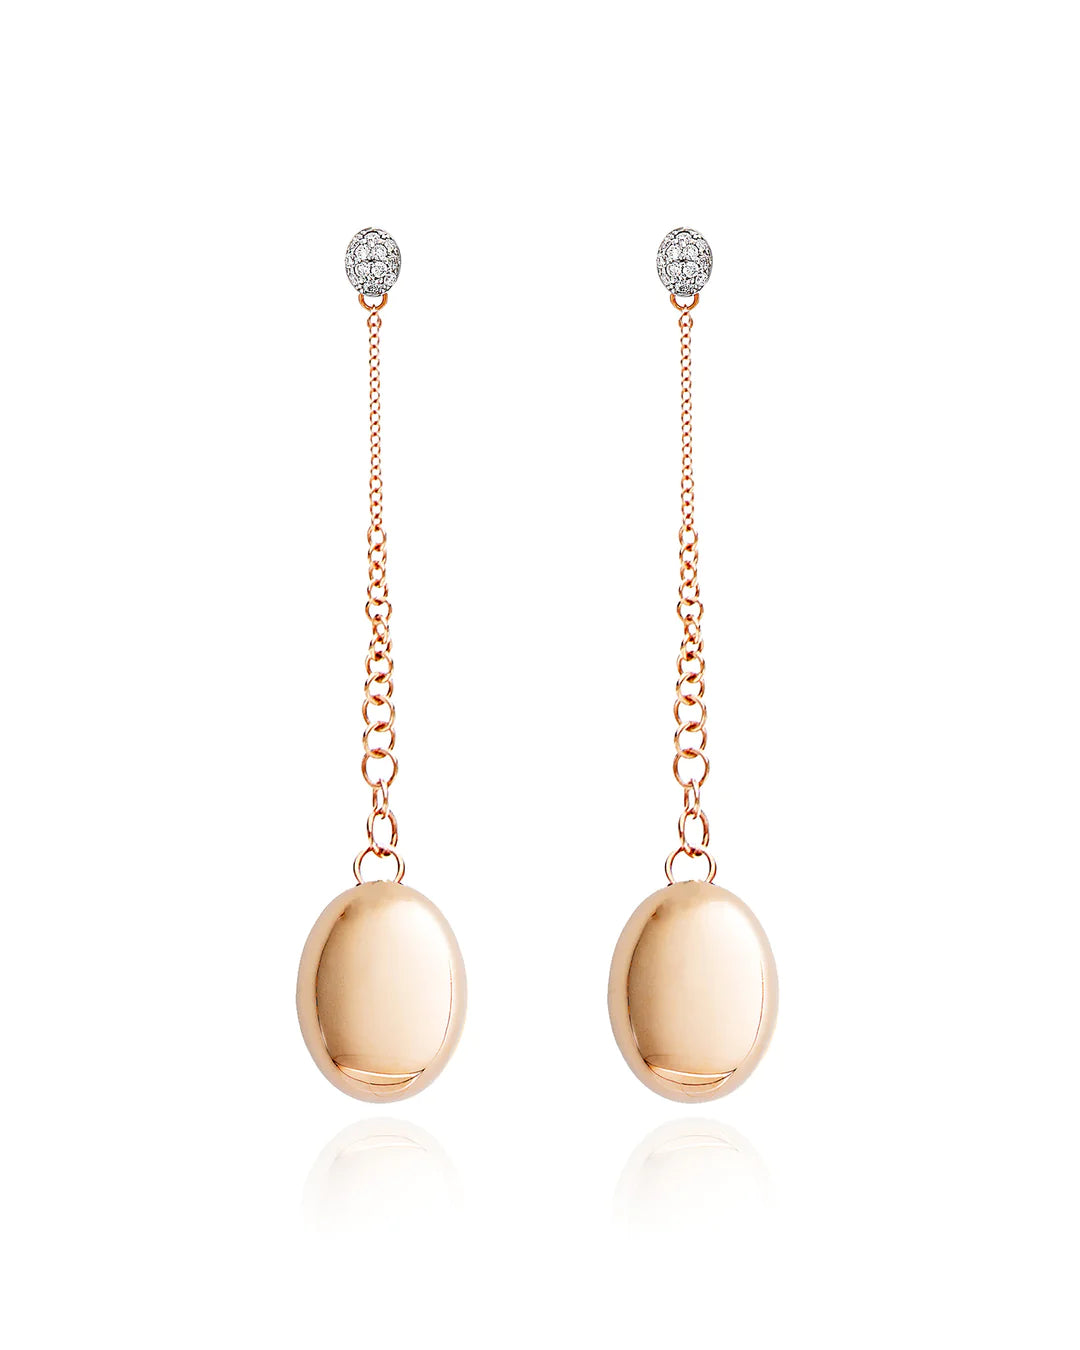 "CANDLE" ROSE GOLD AND DIAMONDS EARRINGS